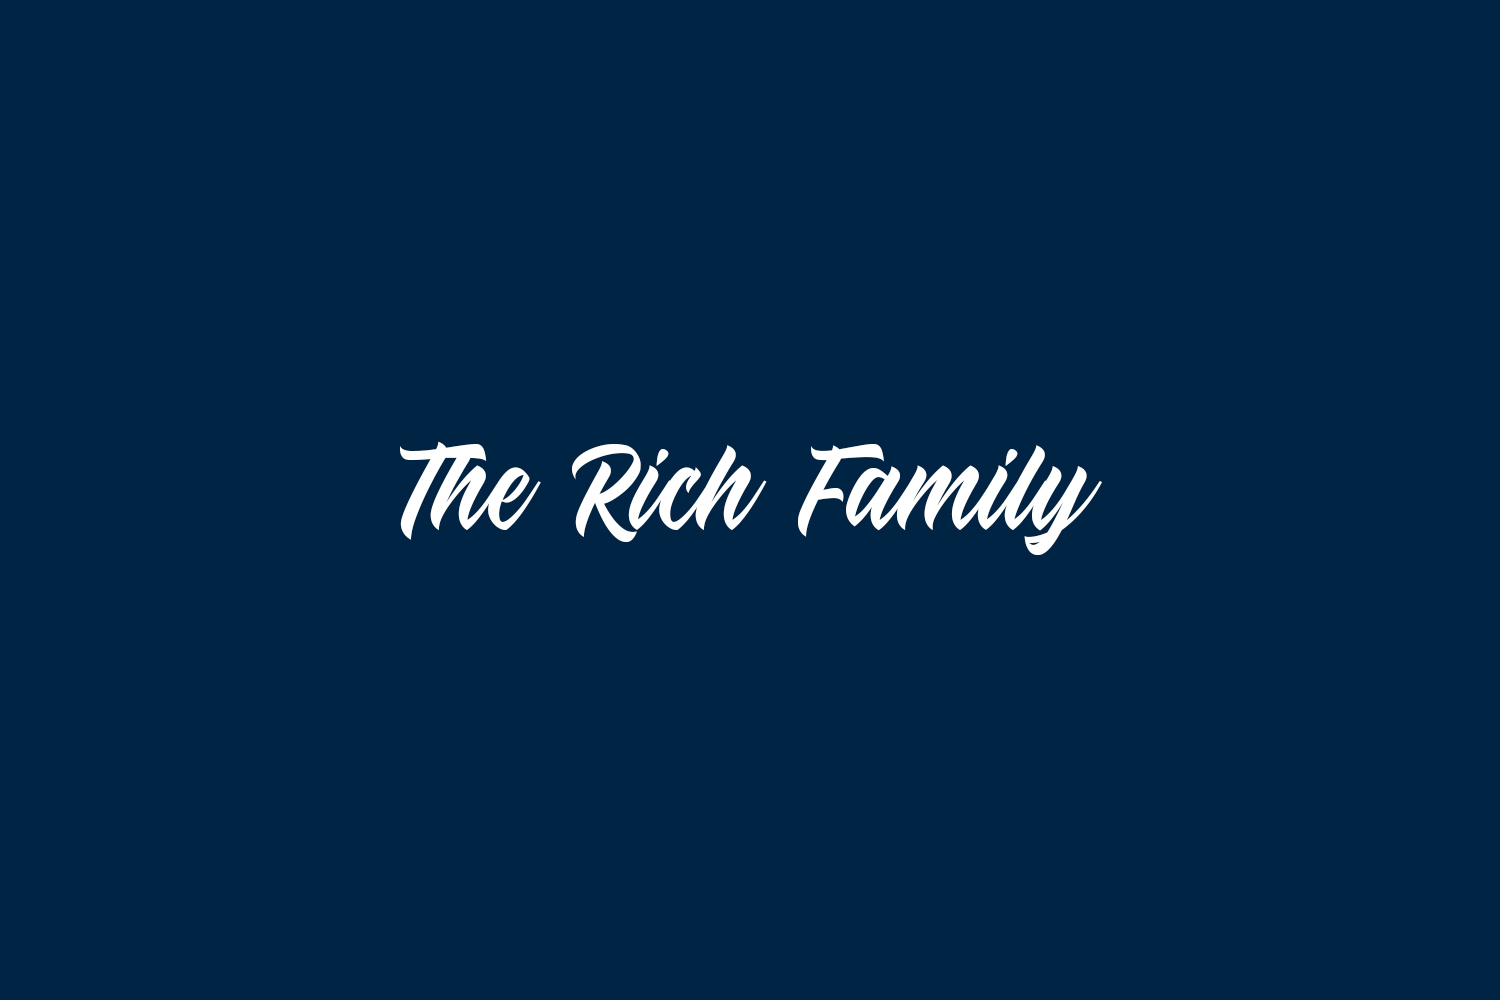 The Rich Family Free Font